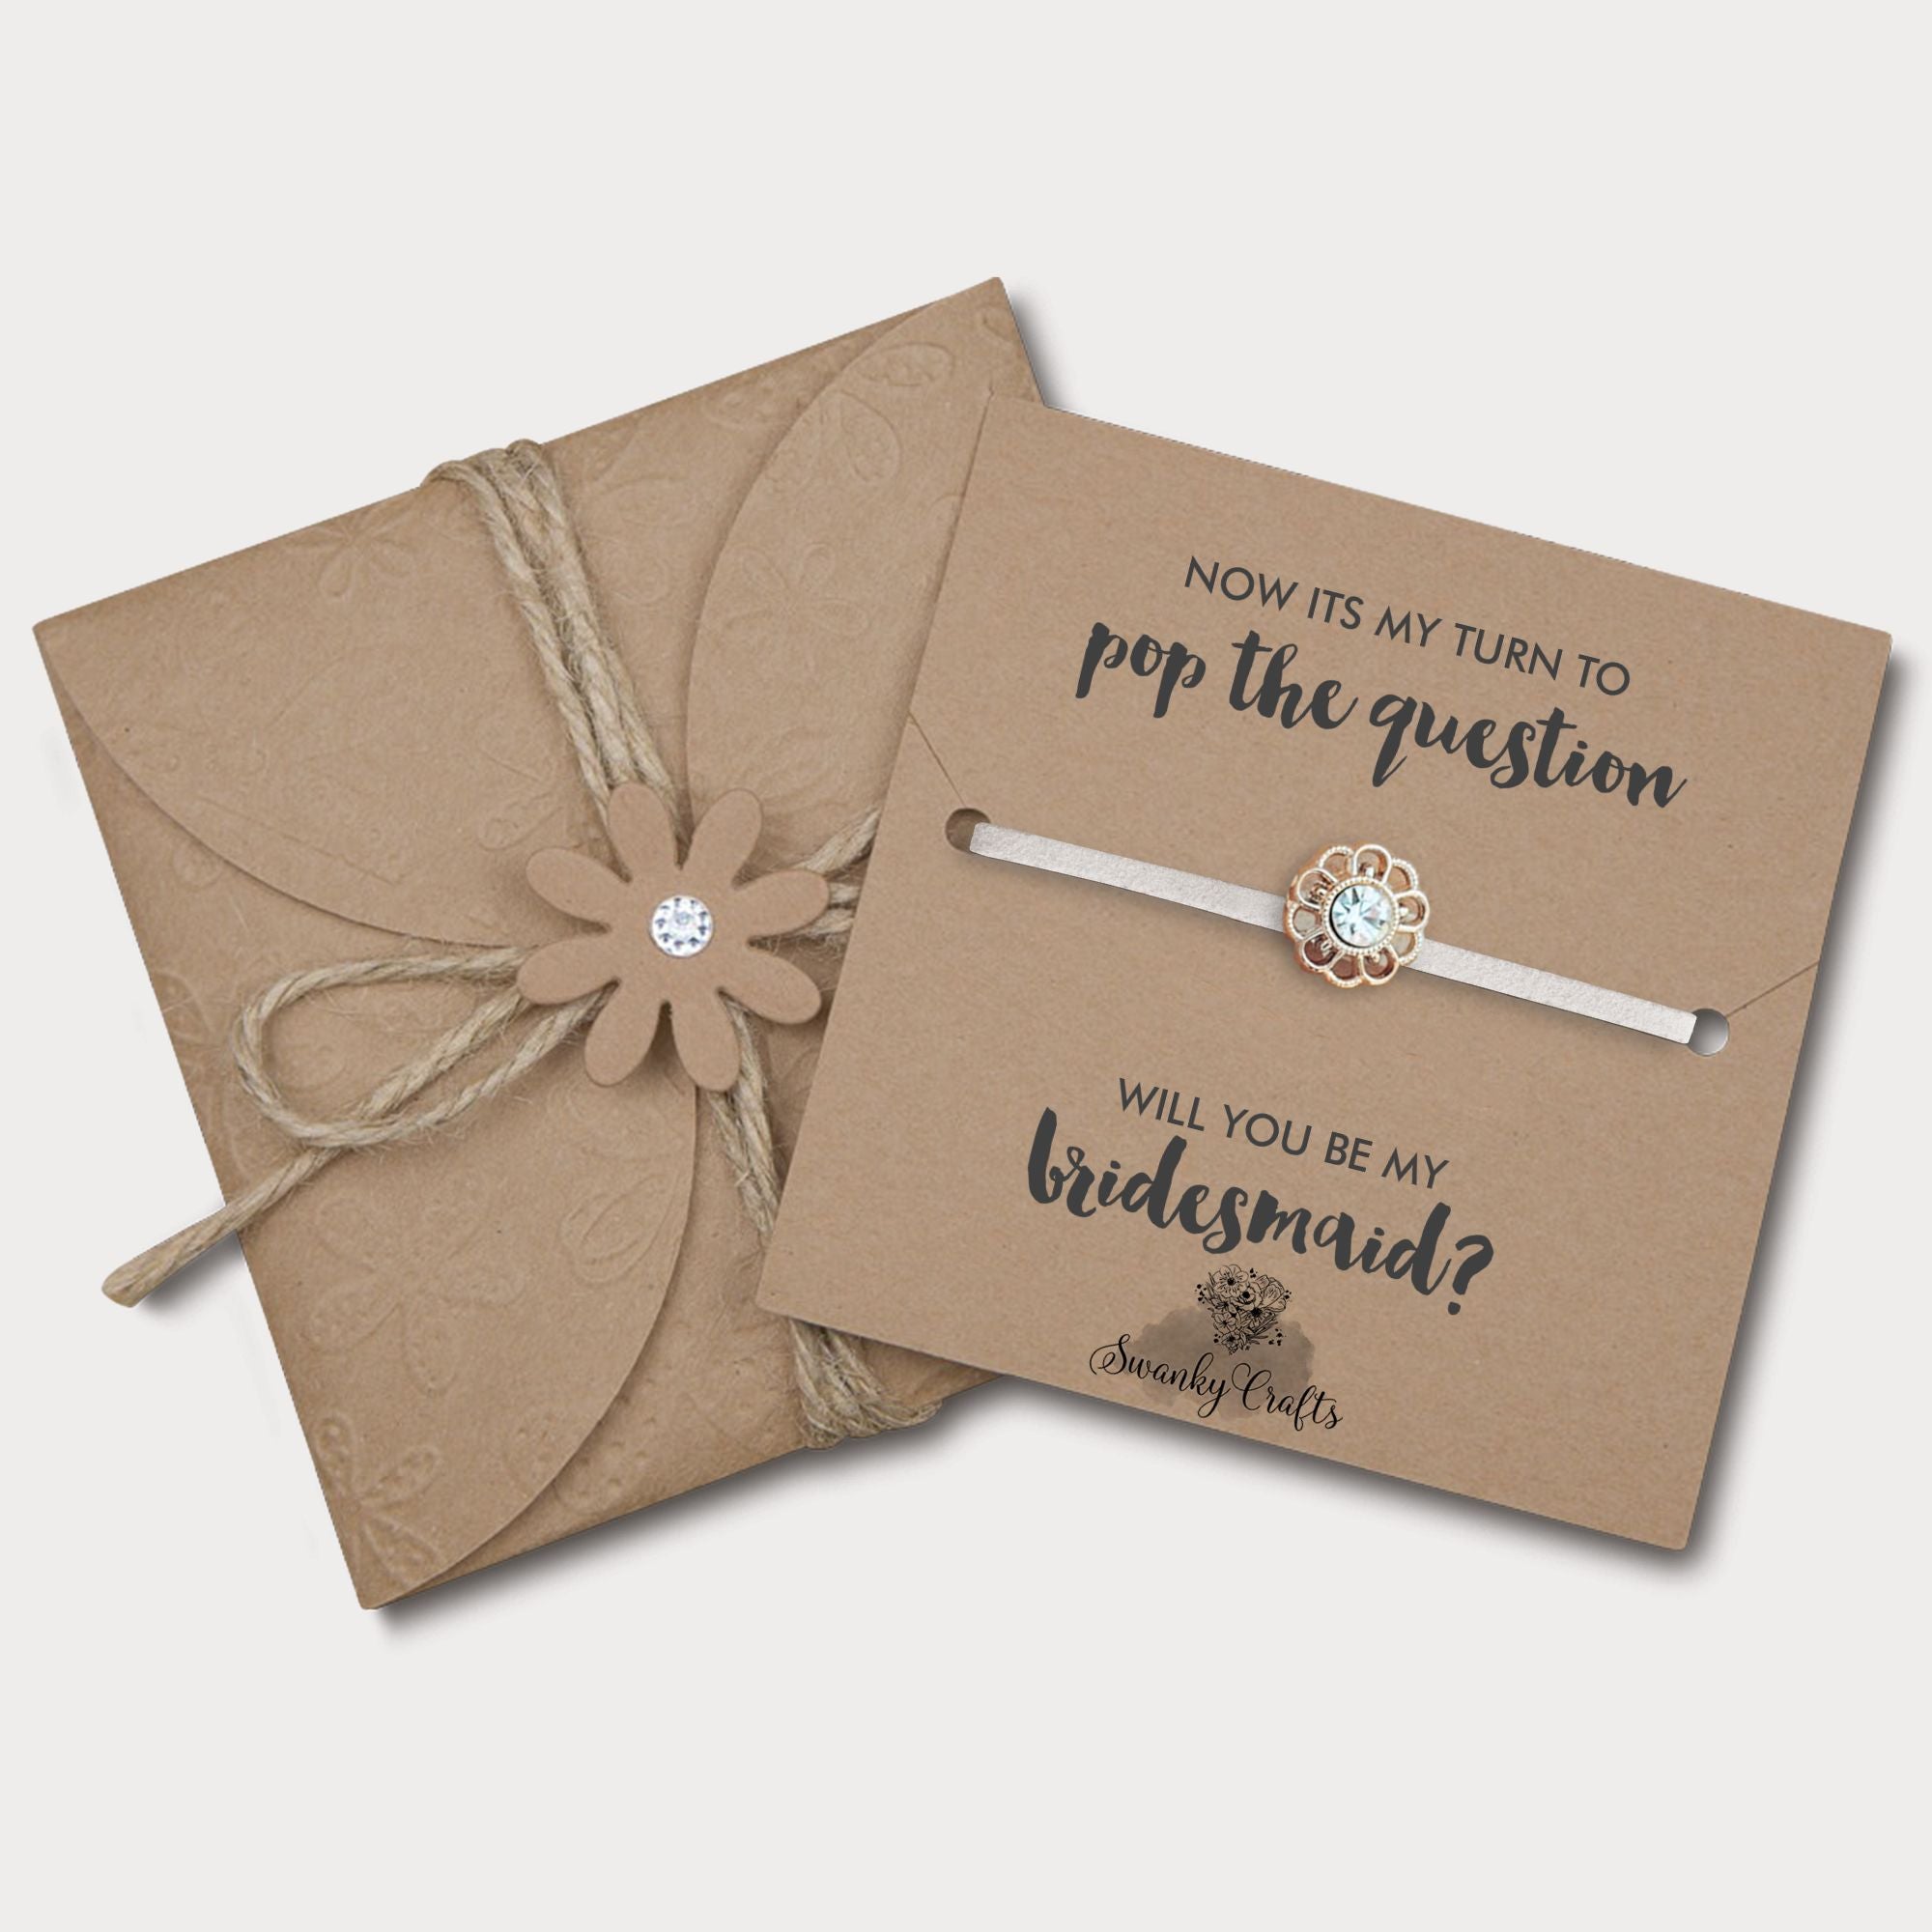 BRIDAL PARTY GIFTS – Swanky Crafts